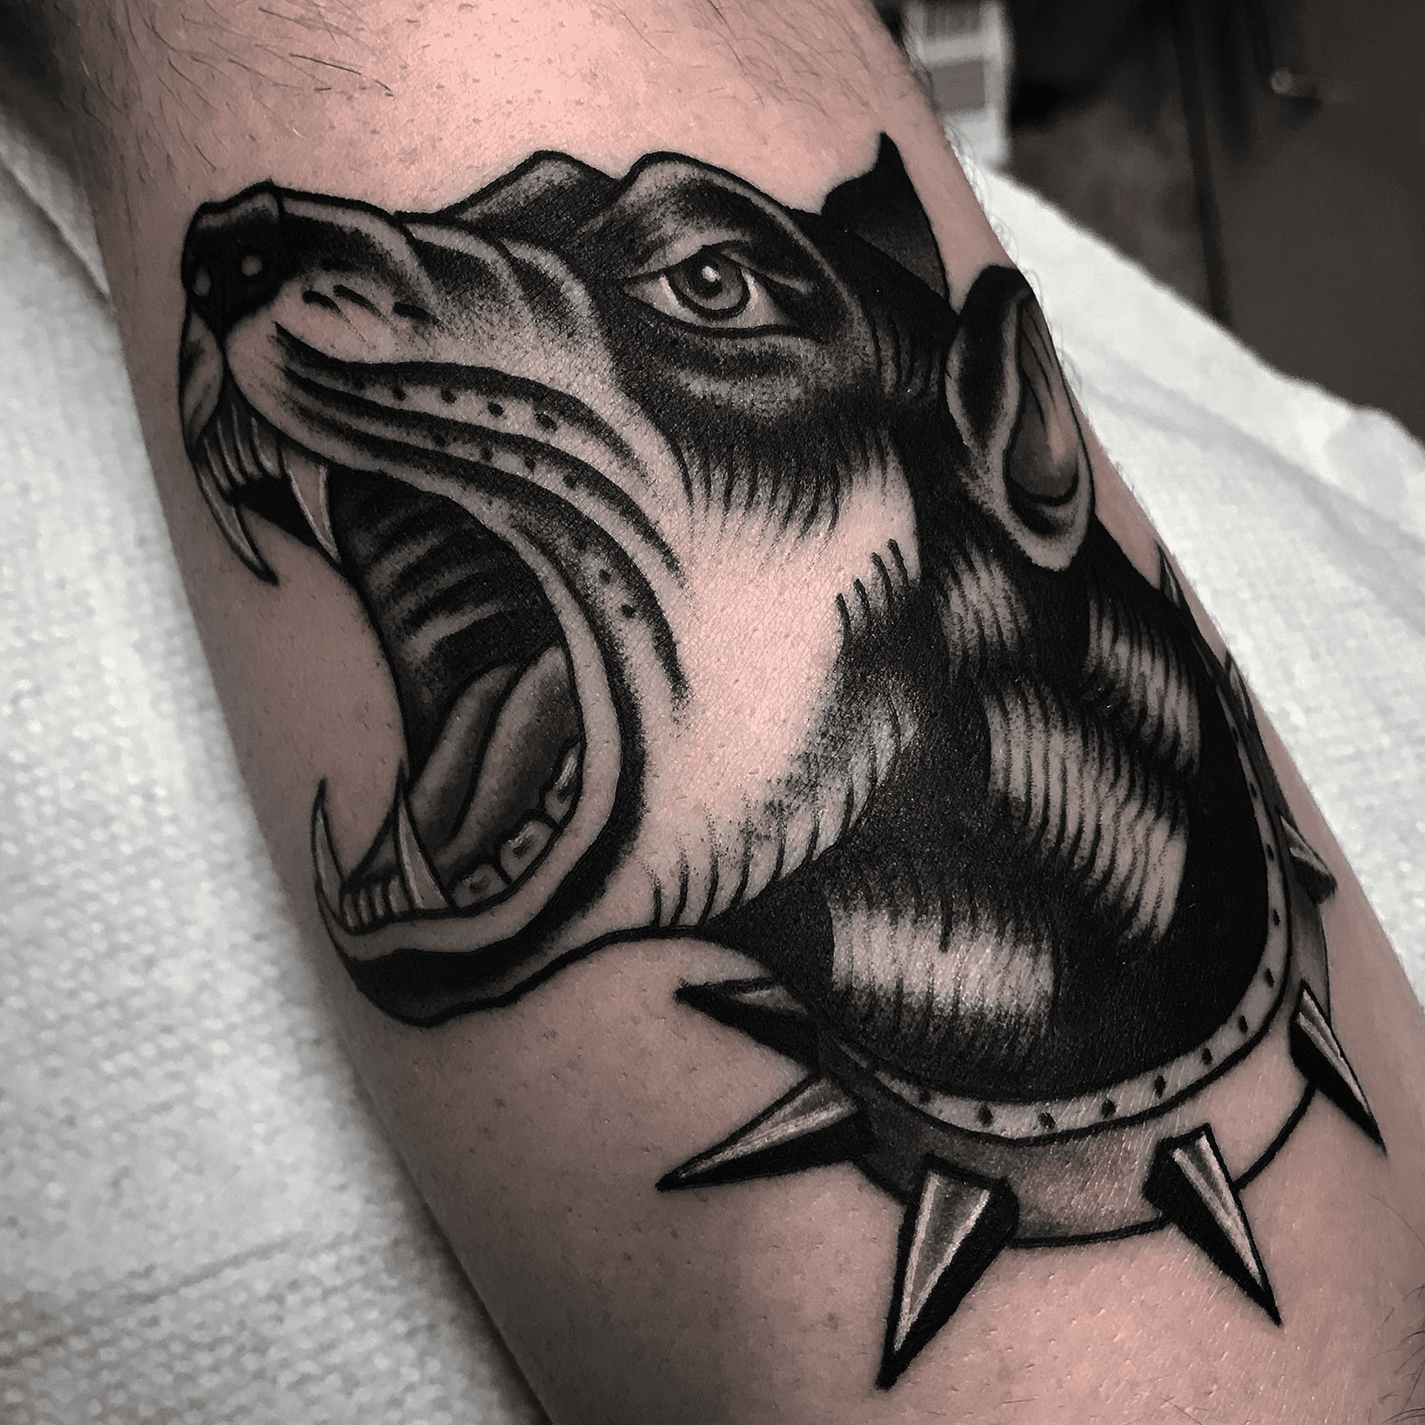 Tattoo uploaded by Stacie Mayer  Neo traditional doberman cover up tattoo  by Andrew Strychnine coverup neotraditional dog doberman  AndrewStrychnine  Tattoodo